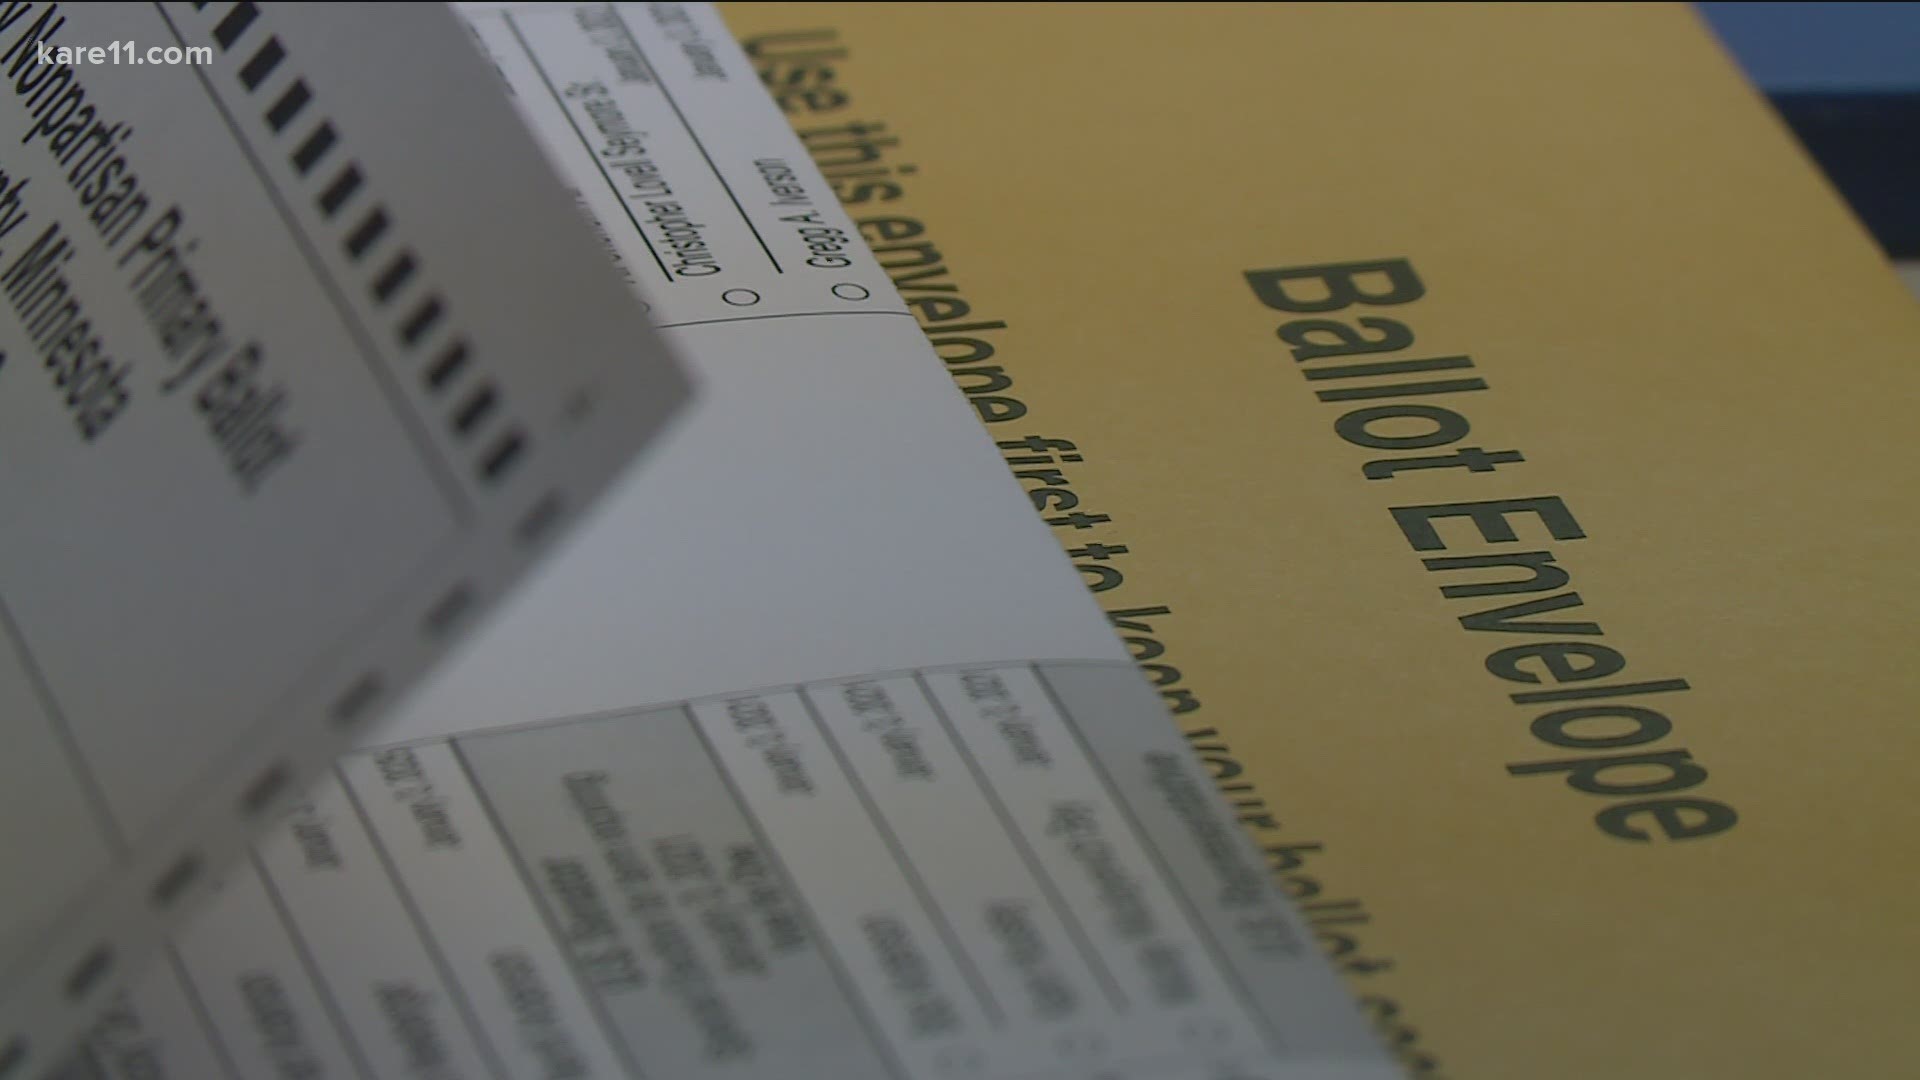 Election officials are urging people still in possession of their absentee ballots to bring them county elections center or designated early drop off sites.